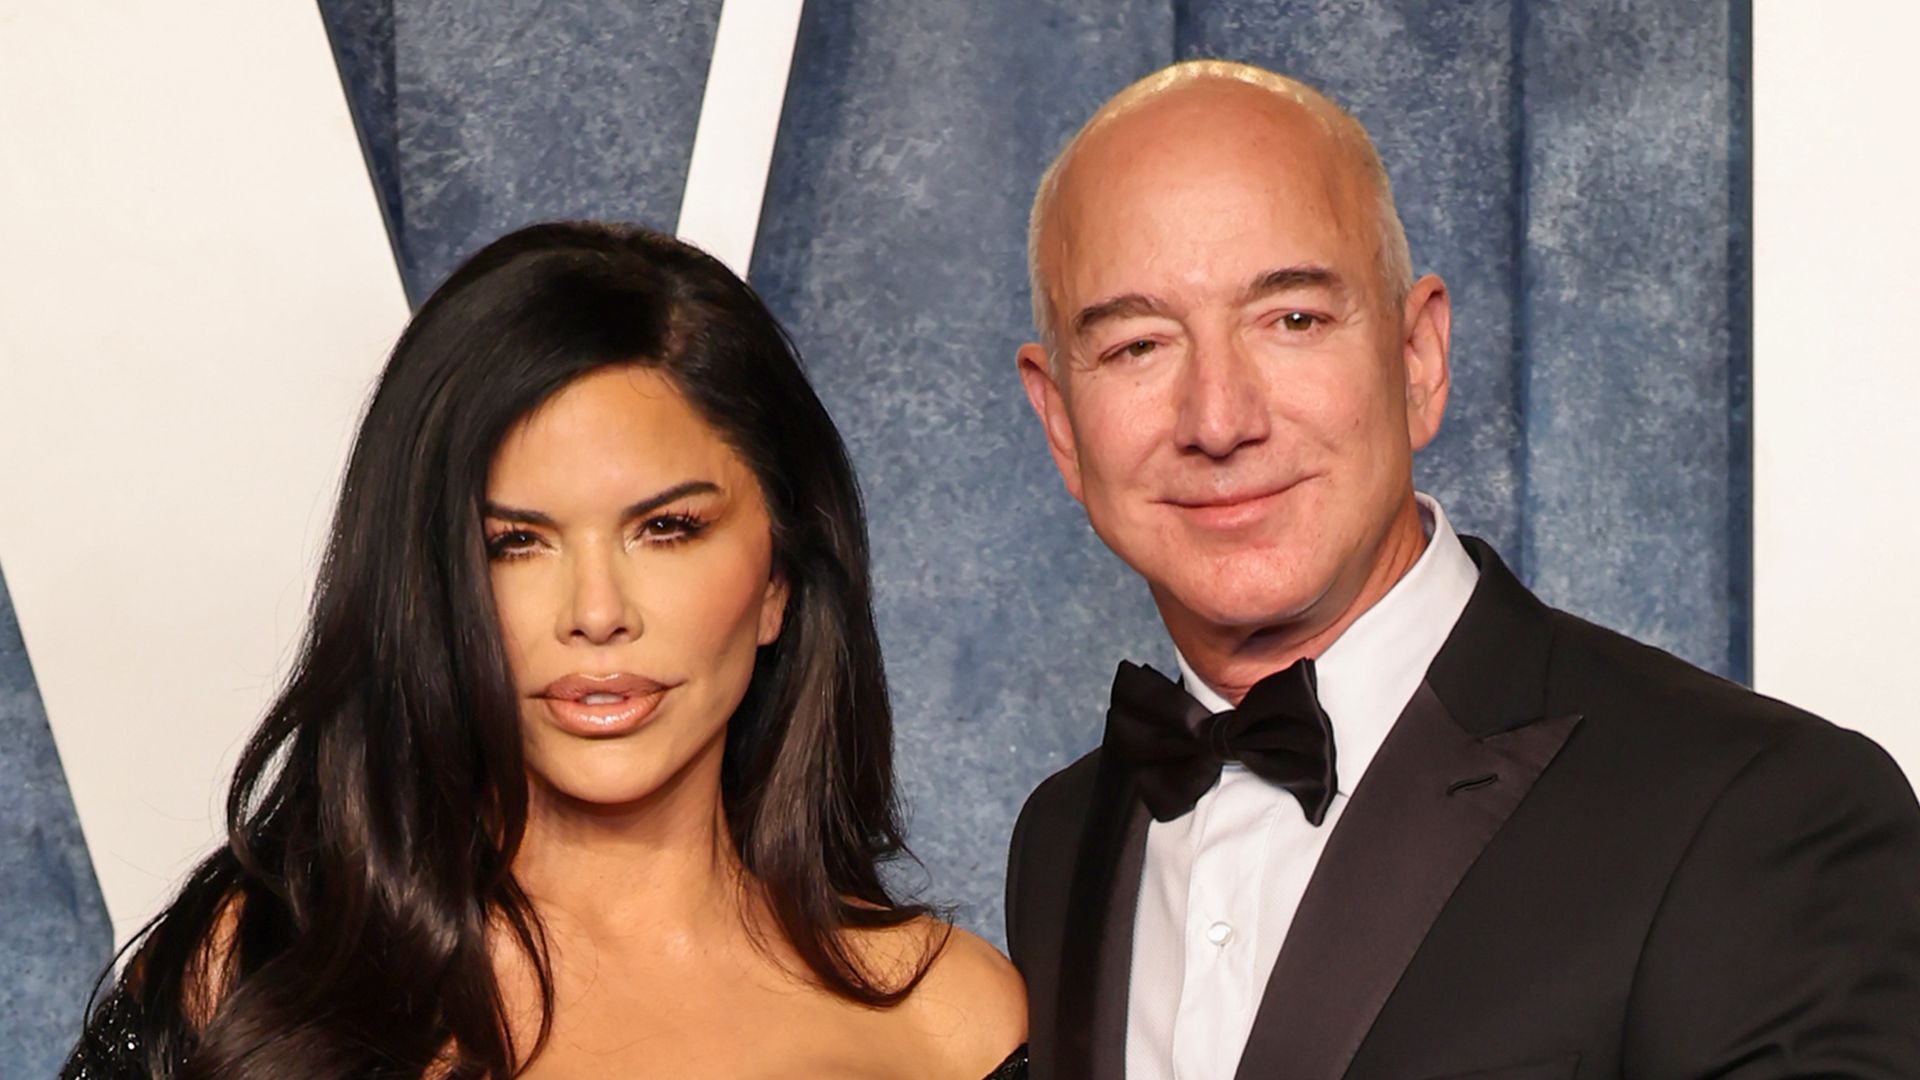 Jeff Bezos and Lauren SÃ¡nchez attend the 2023 Vanity Fair Oscar Party Hosted By Radhika Jones at Wallis Annenberg Center for the Performing Arts on March 12, 2023 in Beverly Hills, California.